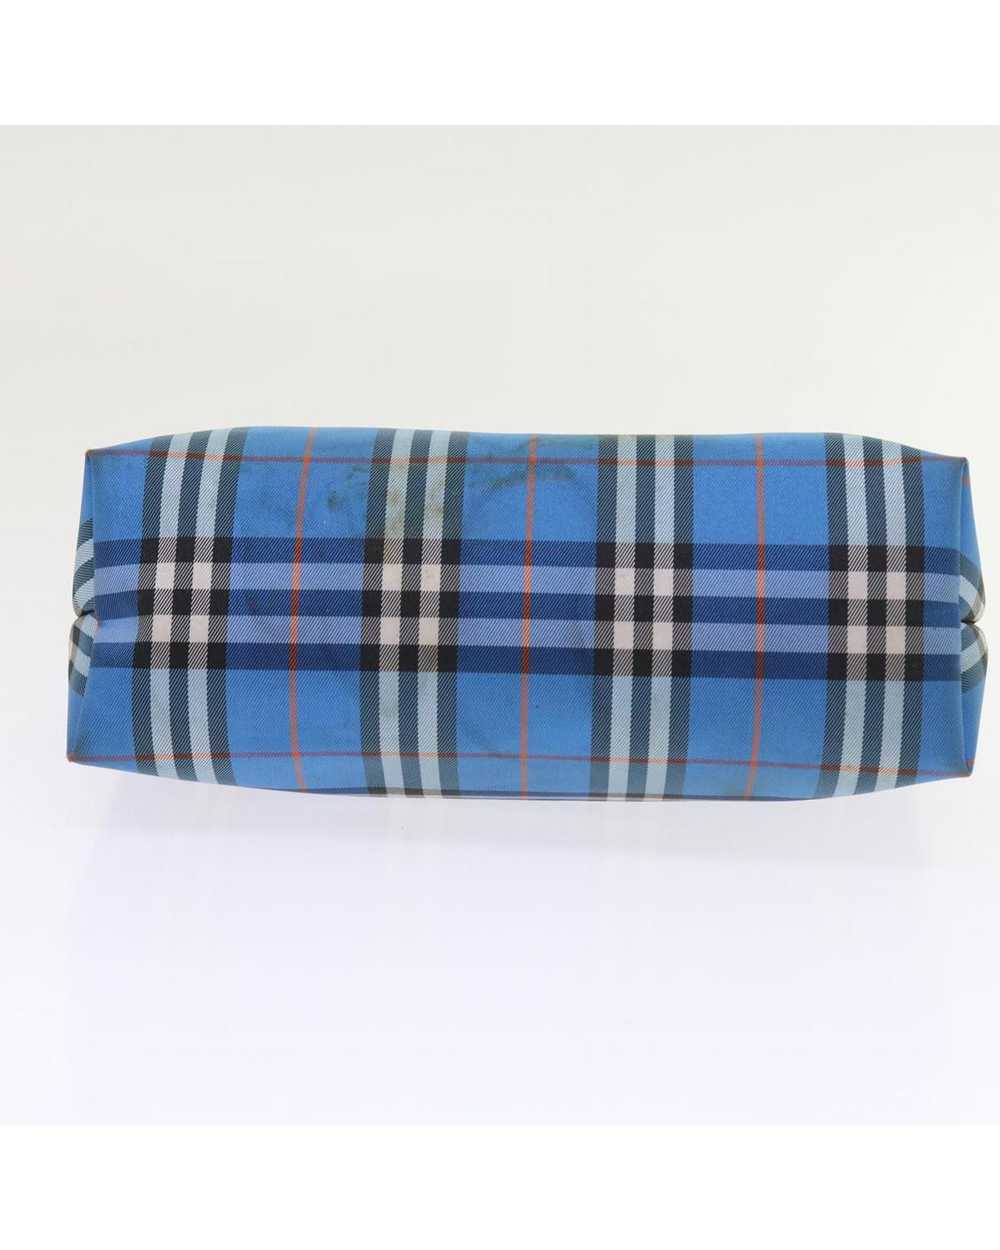 Burberry Blue Nylon Pouch with Check Print - image 6